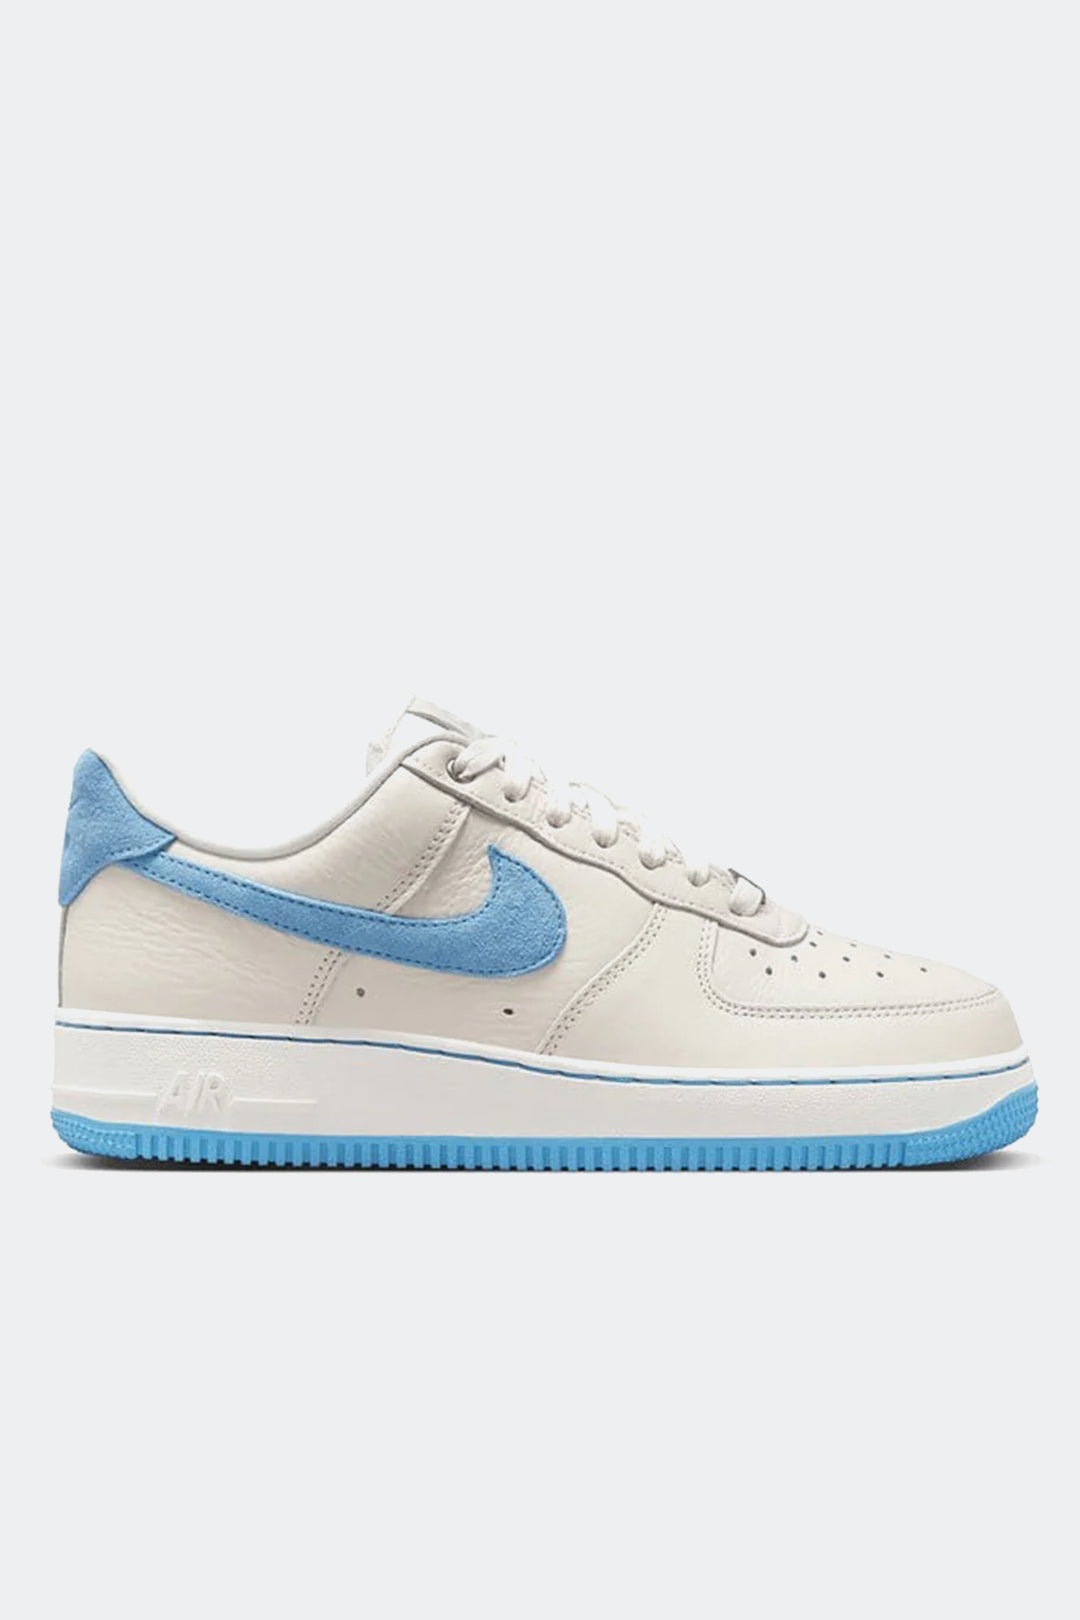 NIKE AIR FORCE 1 LOW LXX "UNIVERSITY BLUE" - MUJER - HYPE